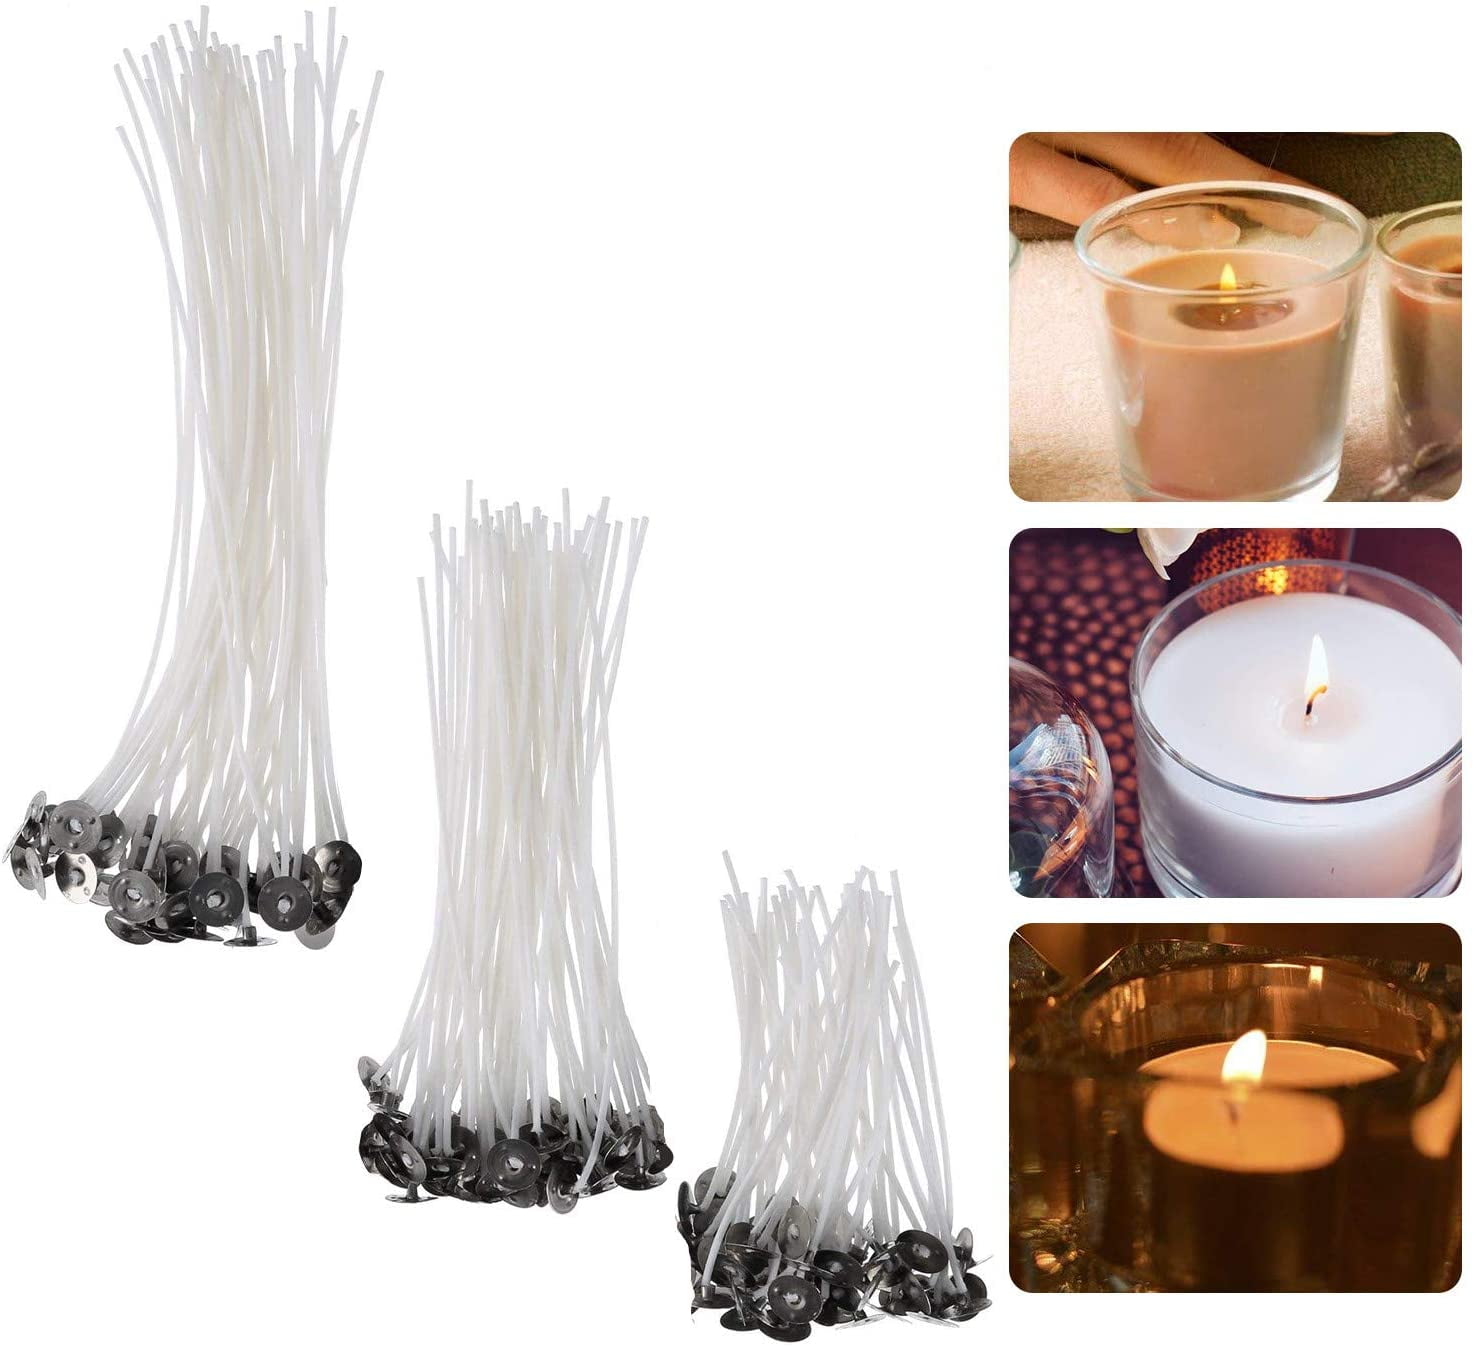 Fish 100PCS/Set White DIY Candle Wick Cotton Core Candle Making Tool Art Candles Pre Waxed Accessories Decor 